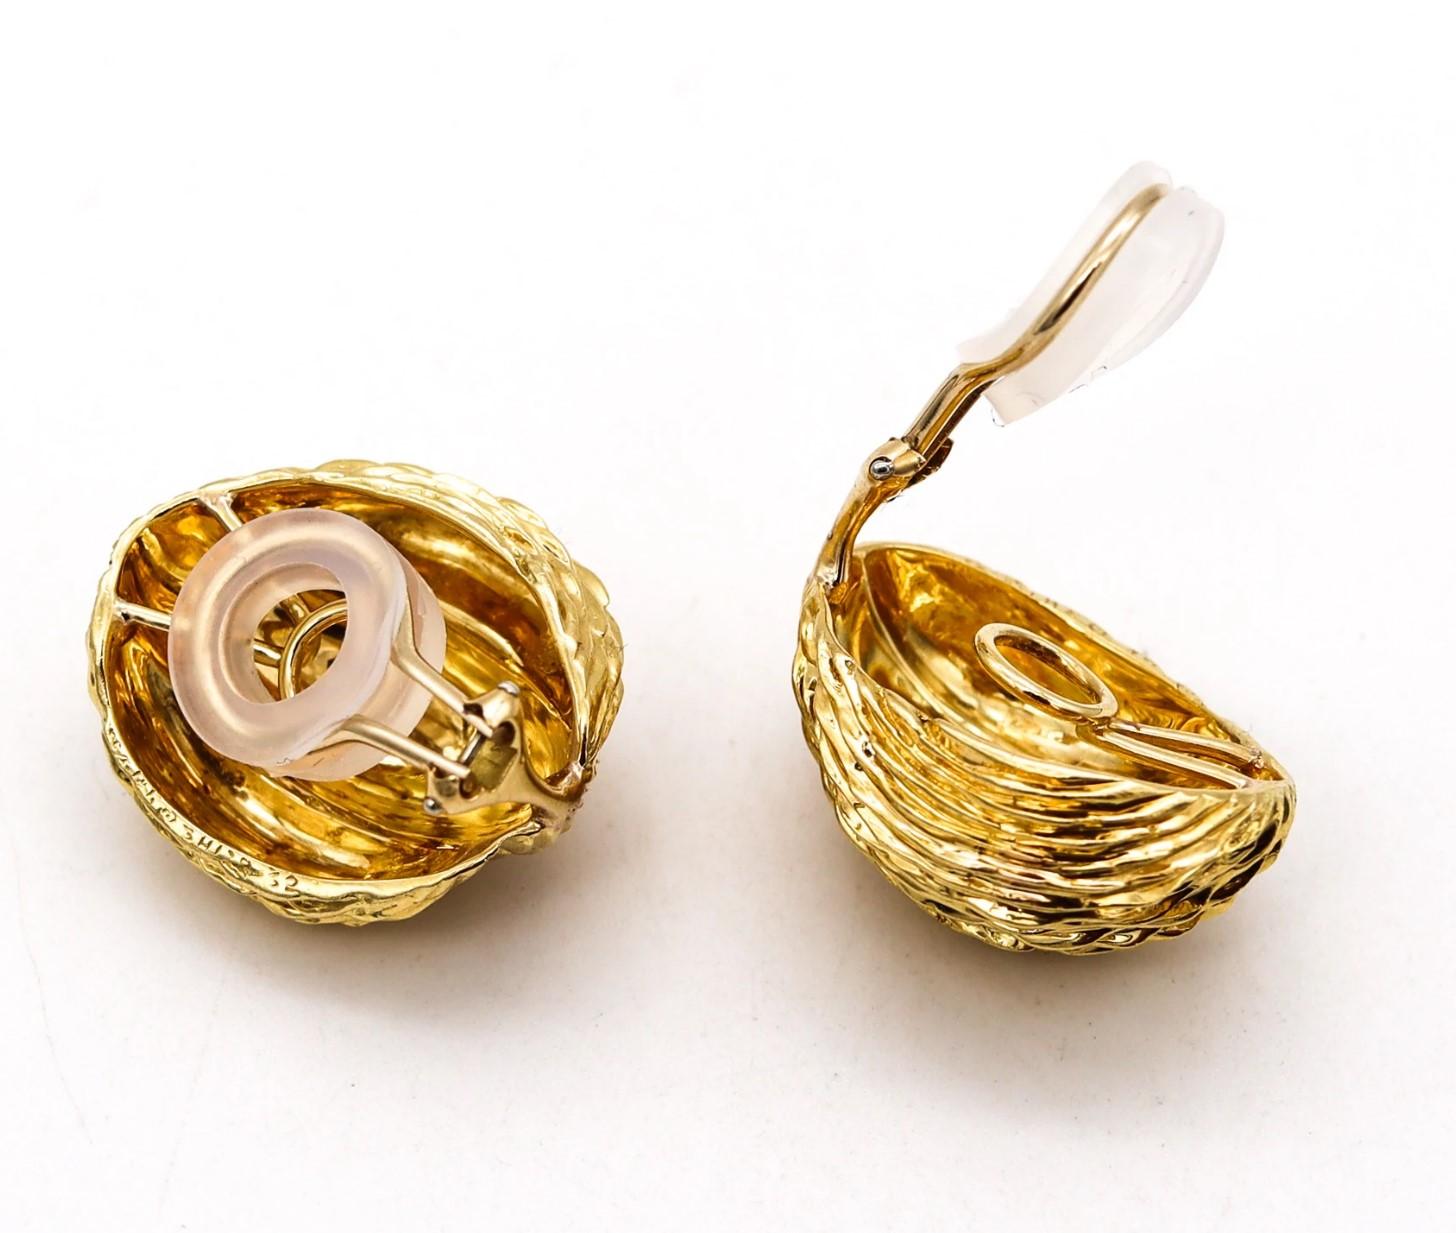 Modernist Van Cleef & Arpels 1970 Pair of Clips on Earrings in Textured 18Kt Yellow Gold For Sale